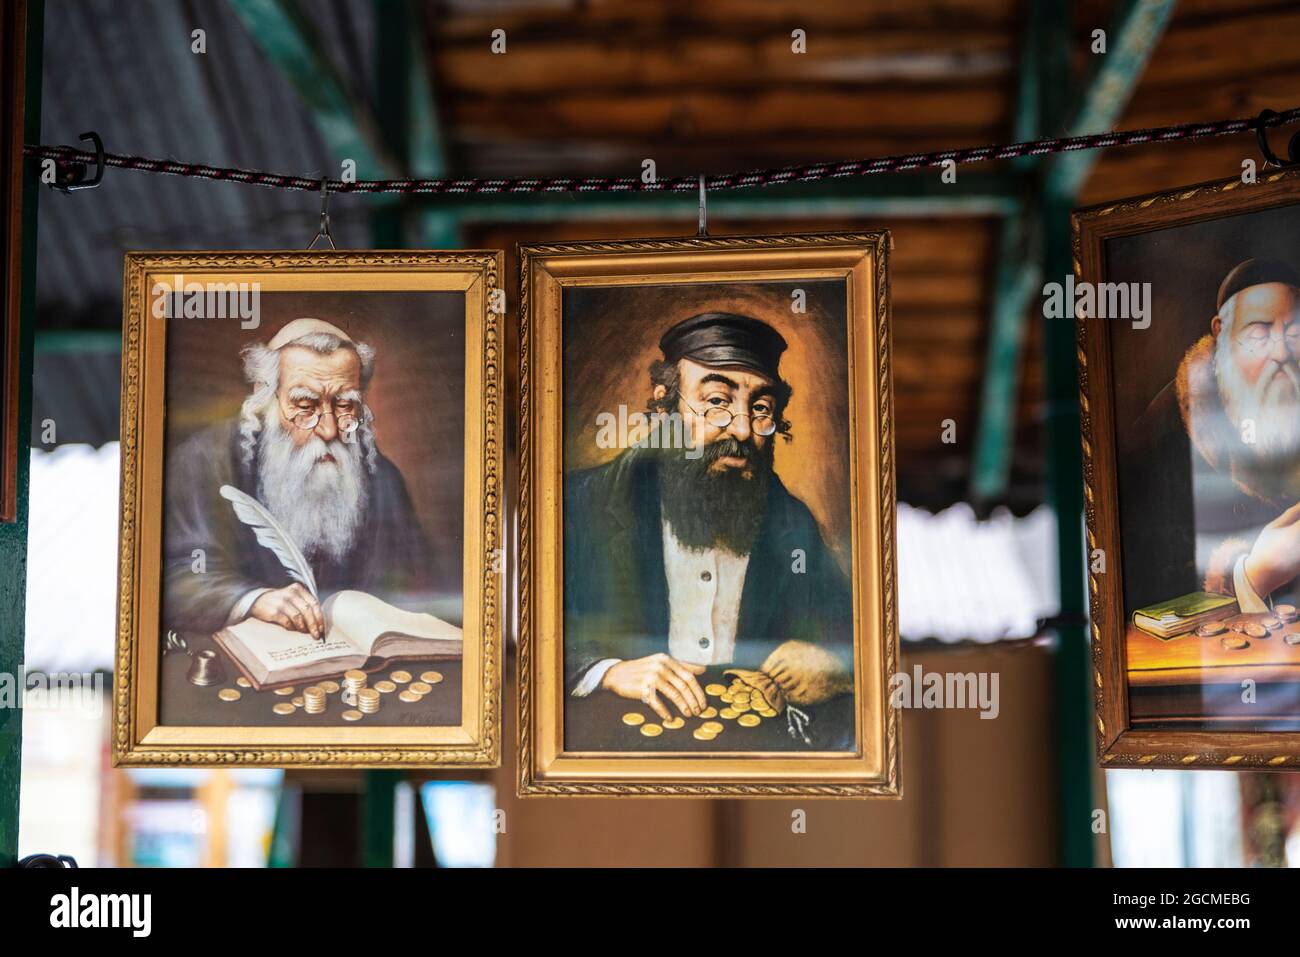 Krakow, Poland - August 28, 2018: Pictures showing jews with gold coins on the flea market in the Plac Nowy in Krakow, Poland Stock Photo